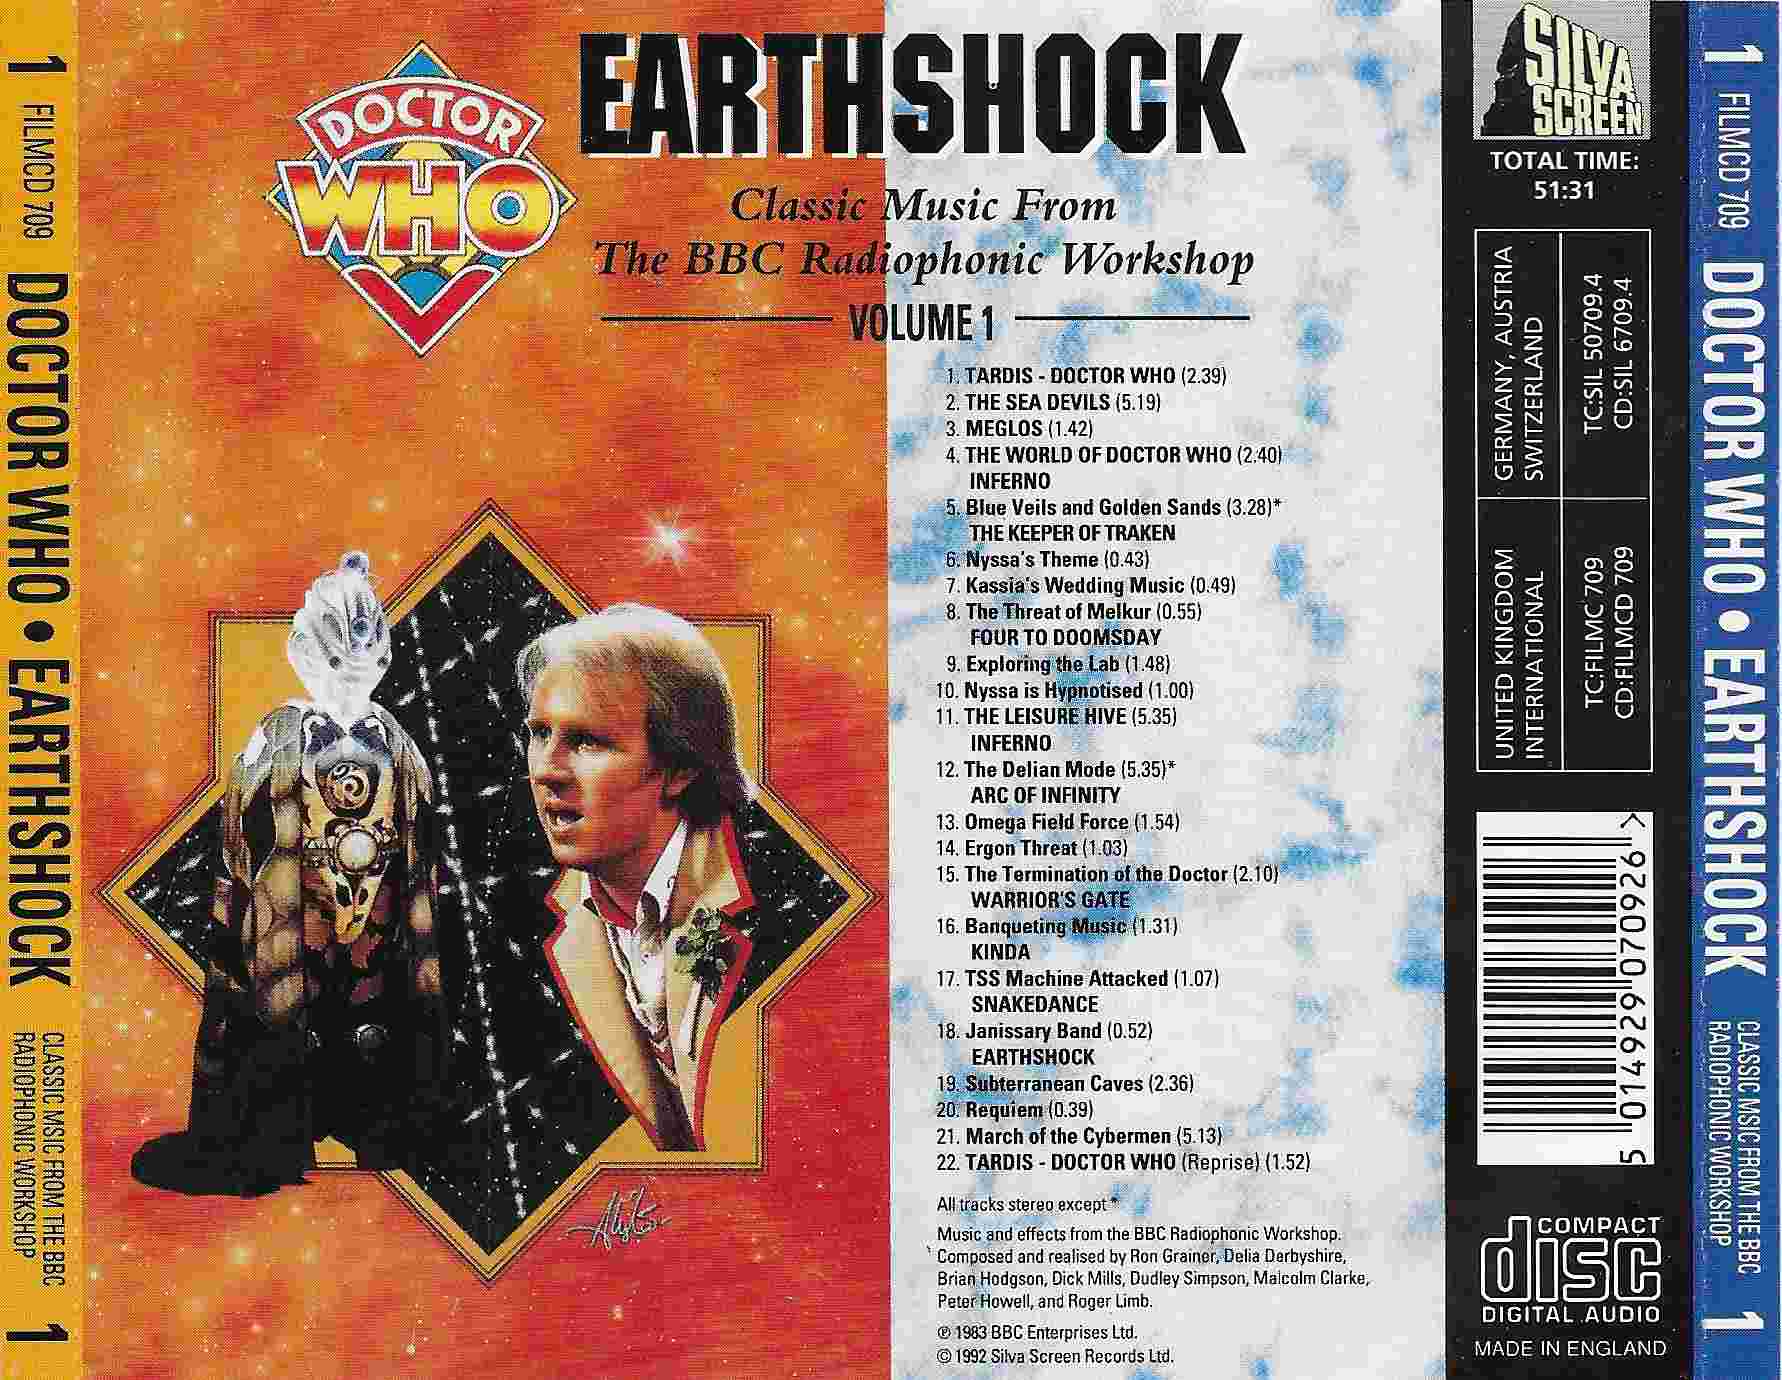 Picture of FILMCD 709 Earthshock - Doctor who the music - Volume 1 by artist Various from the BBC records and Tapes library